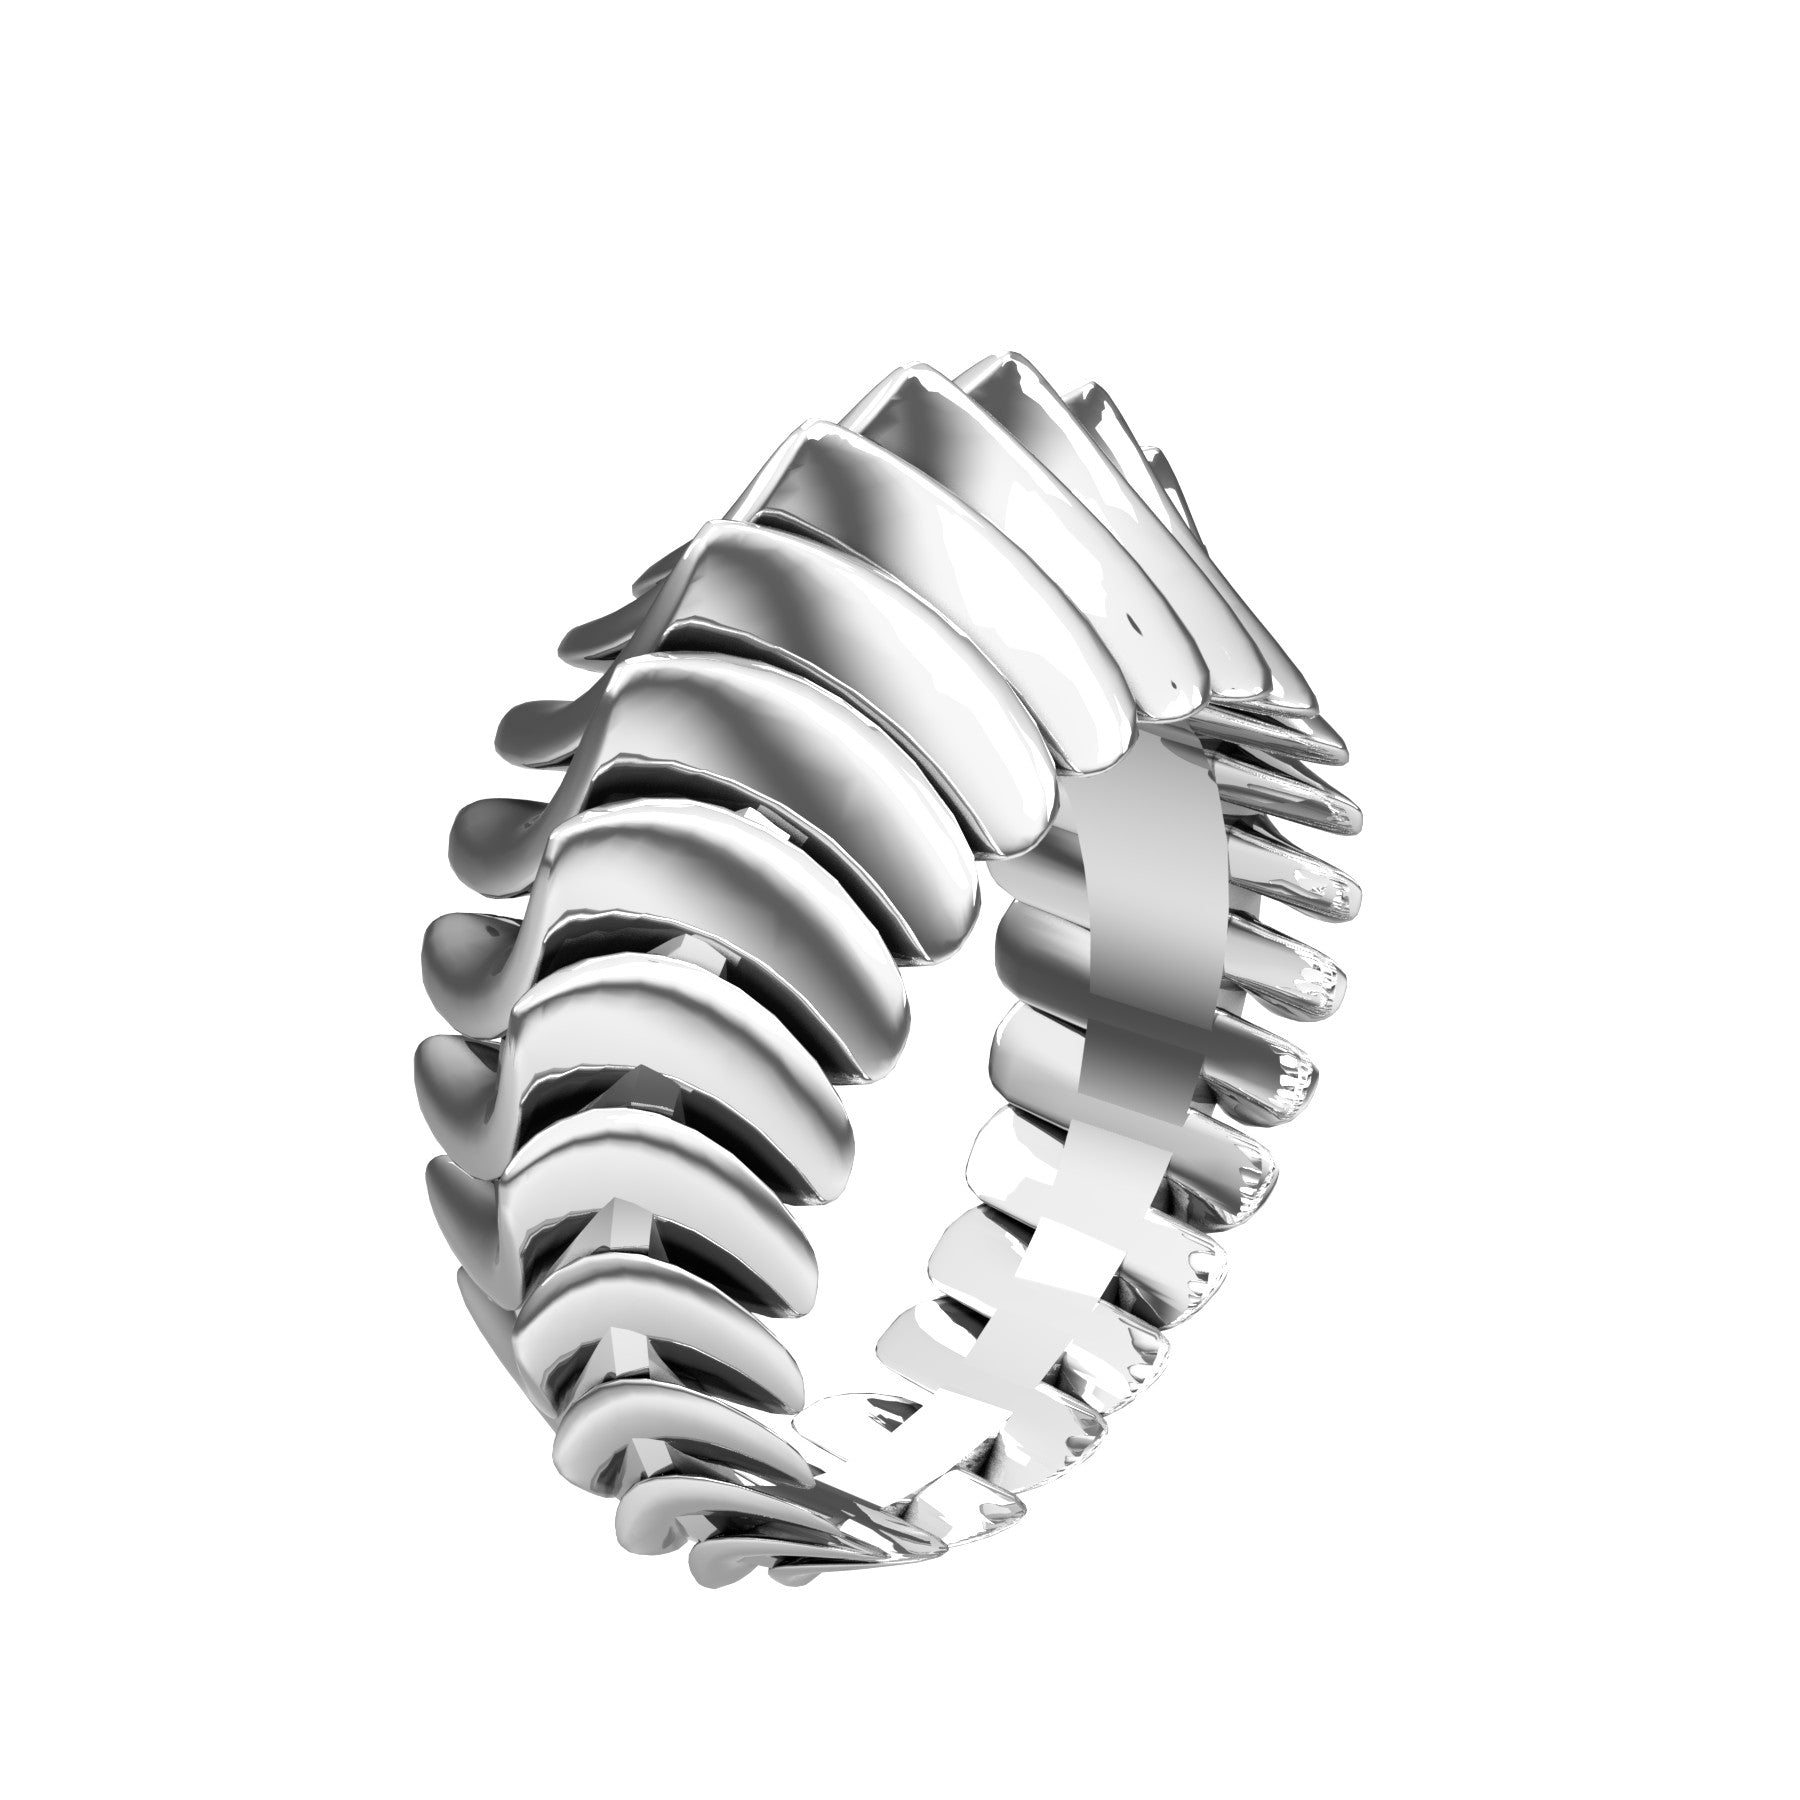 backbone ring, 18 K white gold, weight about 10,8 g. (0.38 oz), width 12,0 mm max